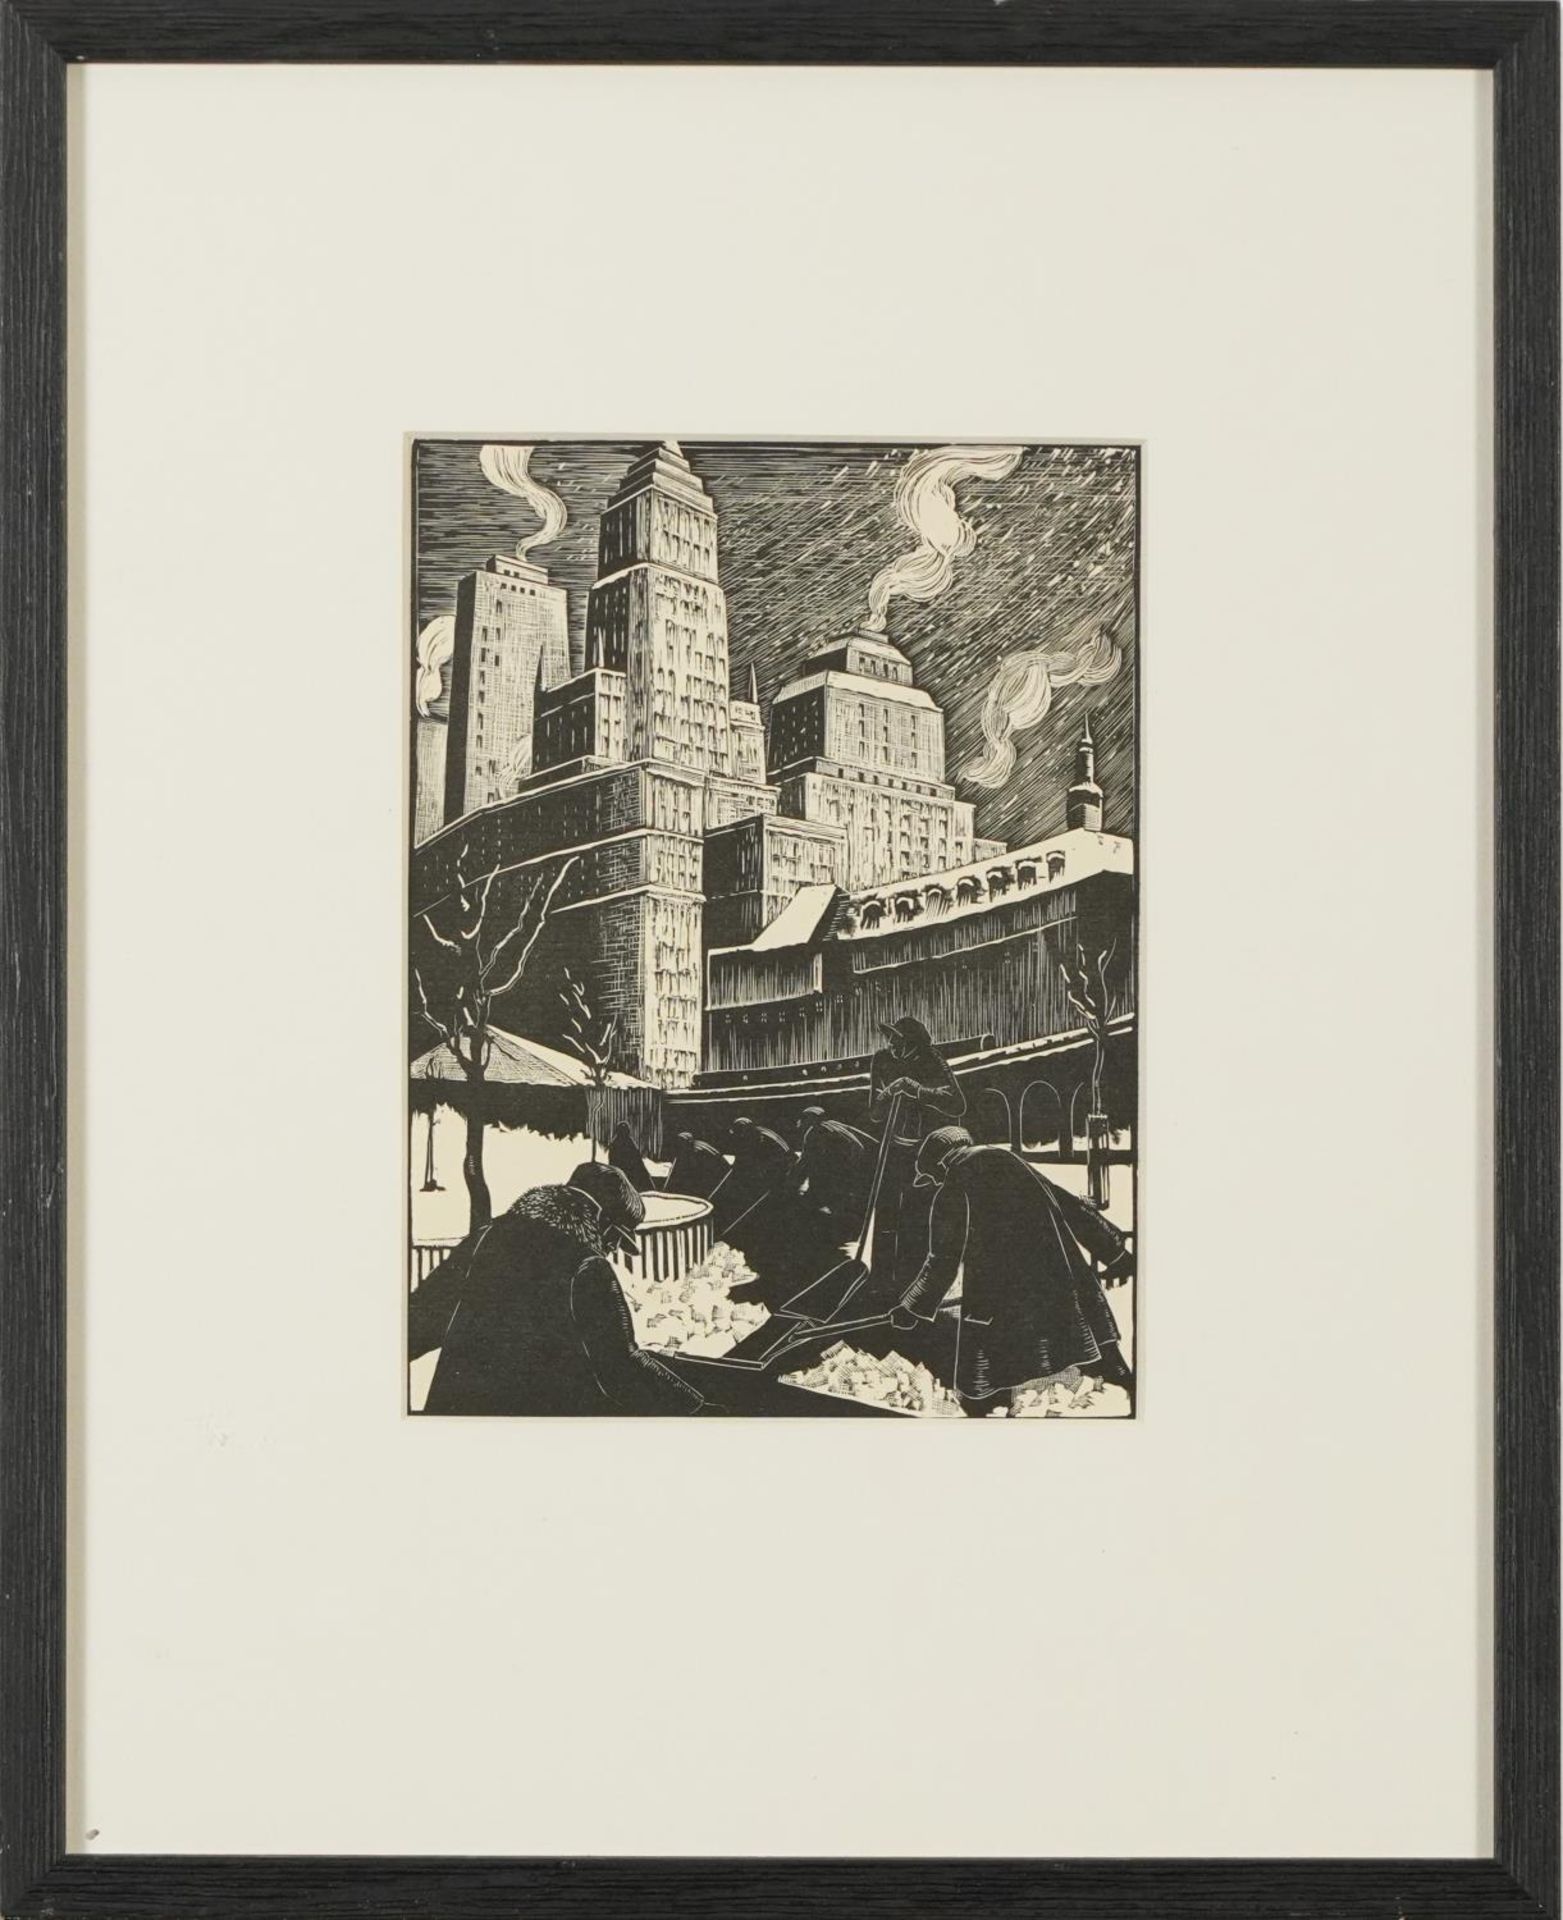 Clare Leighton - Snow shovellers, New York, wood engraving, inscribed Printed by The Curwen Press - Image 2 of 4